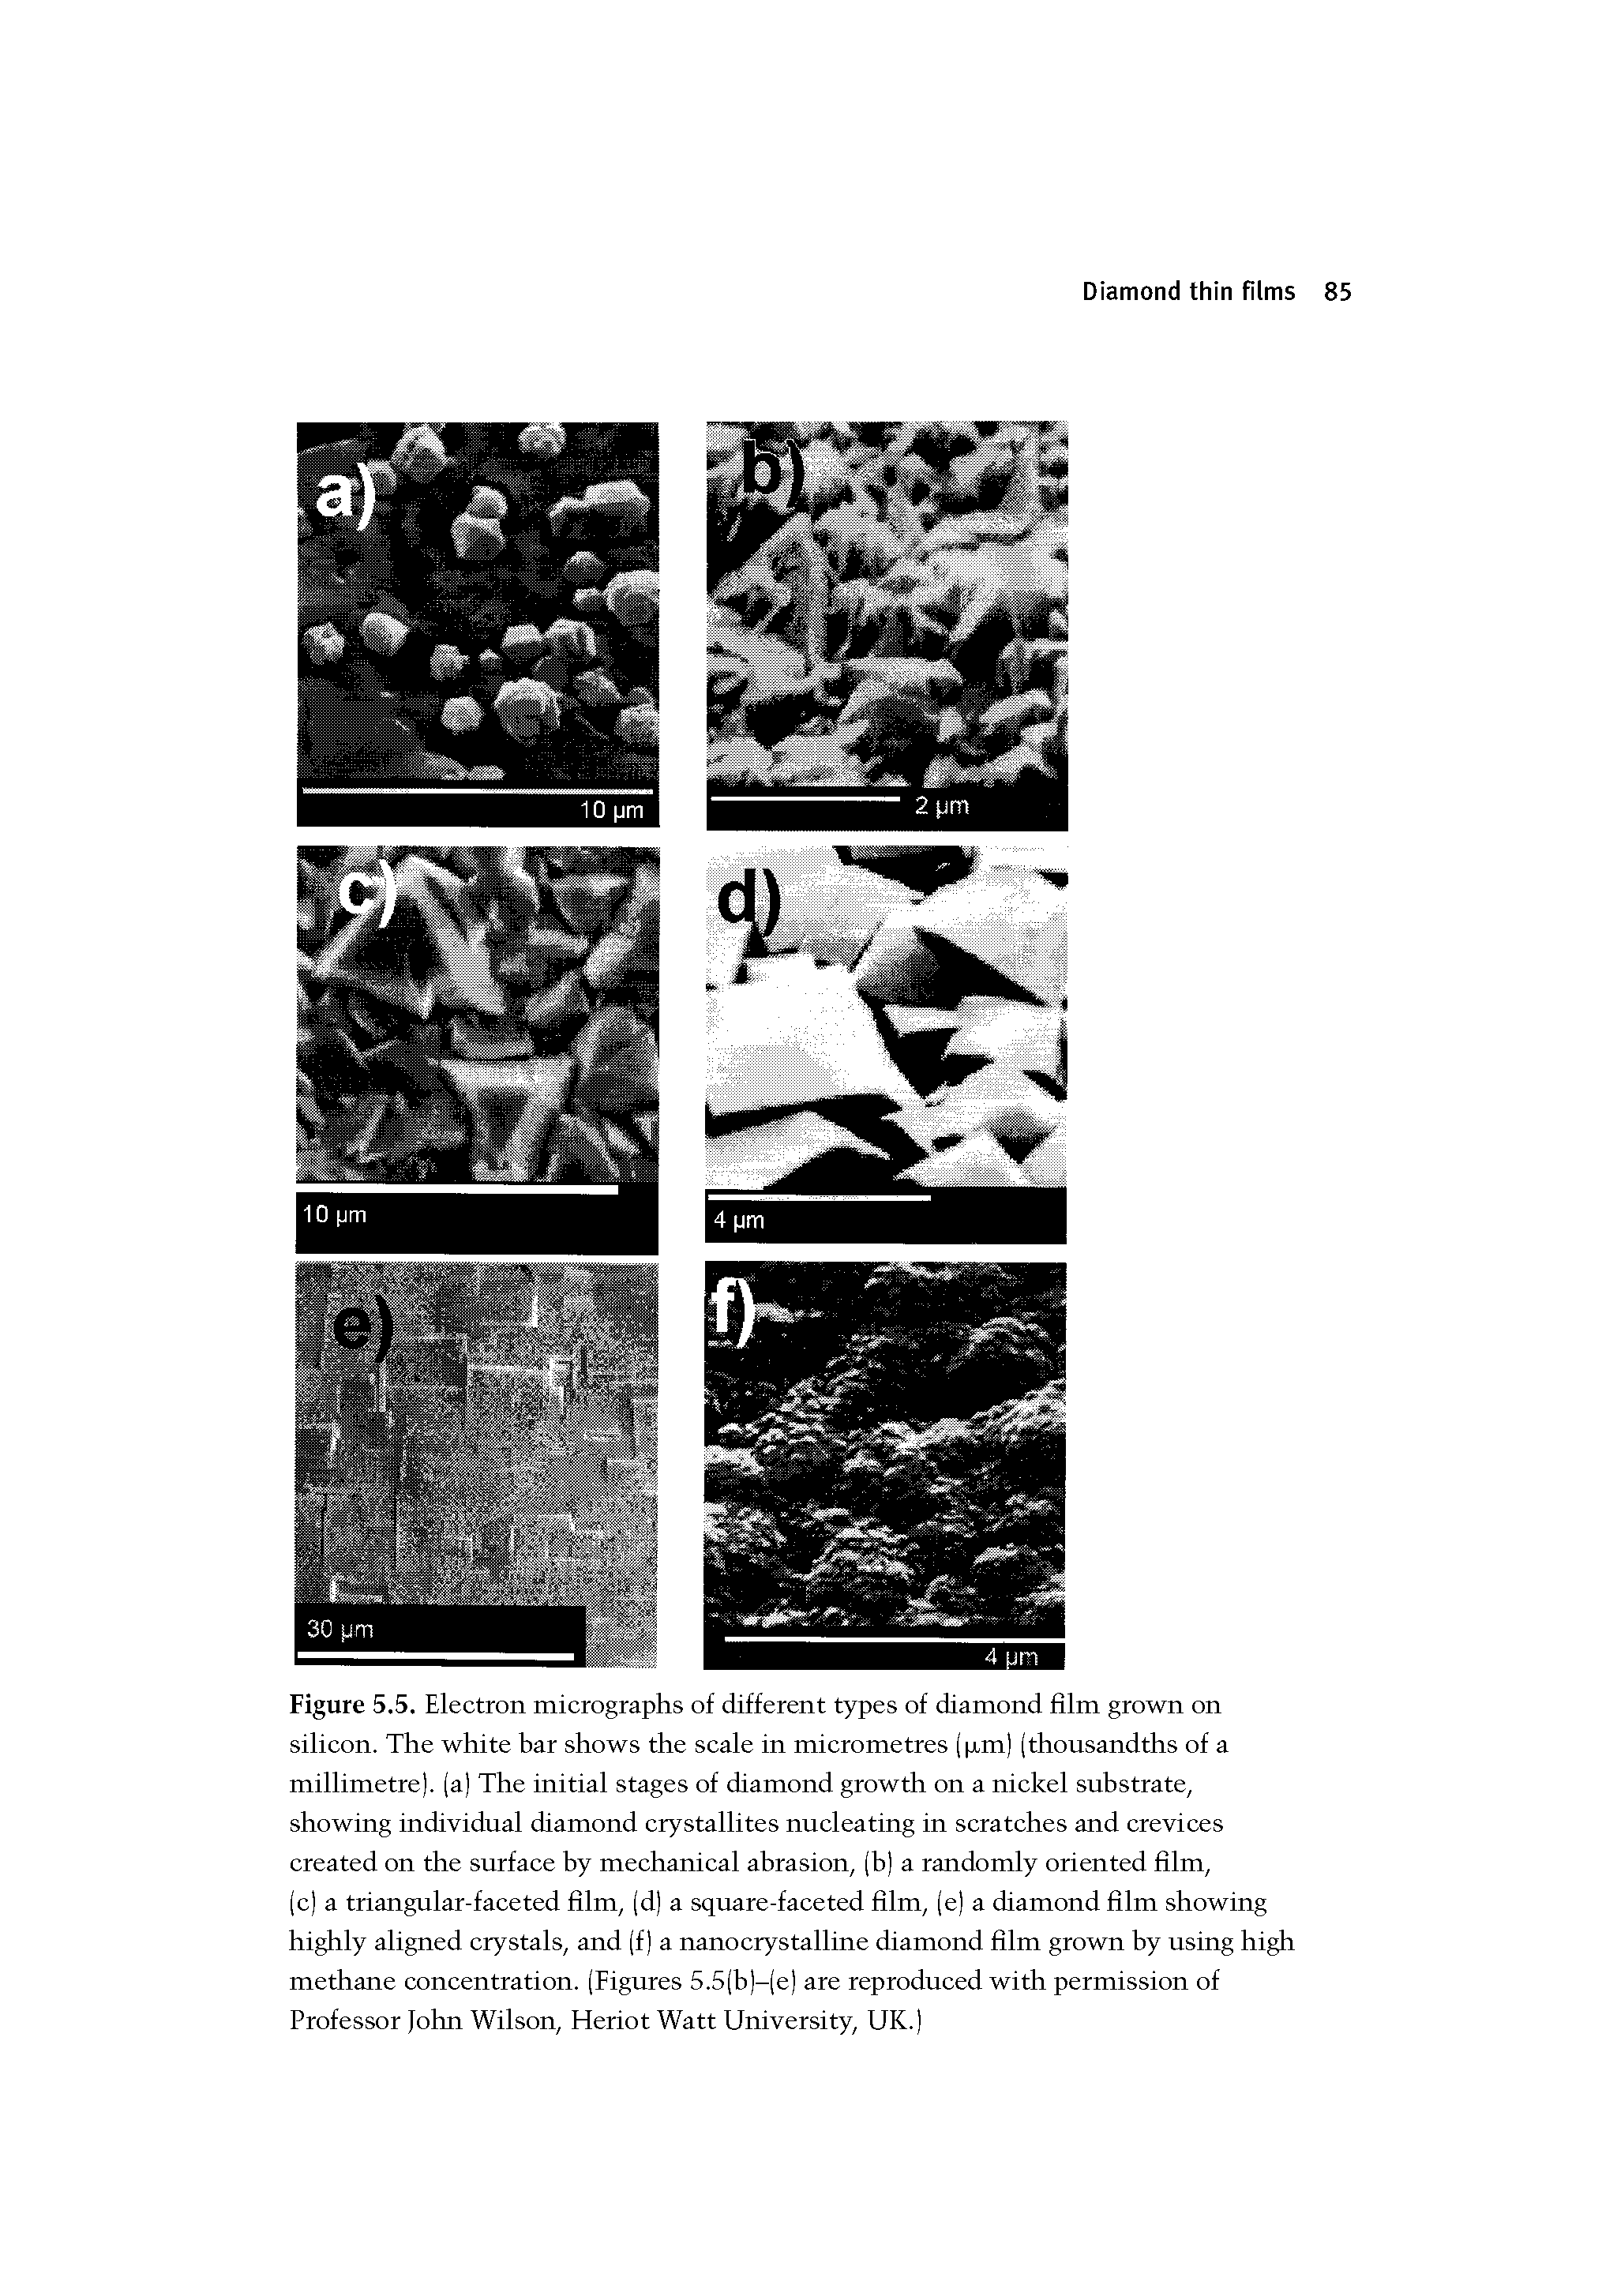 Figure 5.5. Electron micrographs of different types of diamond film grown on silicon. The white bar shows the scale in micrometres (p.m) (thousandths of a millimetre), (a) The initial stages of diamond growth on a nickel substrate, showing individual diamond crystallites nucleating in scratches and crevices created on the surface by mechanical abrasion, (b) a randomly oriented him,...